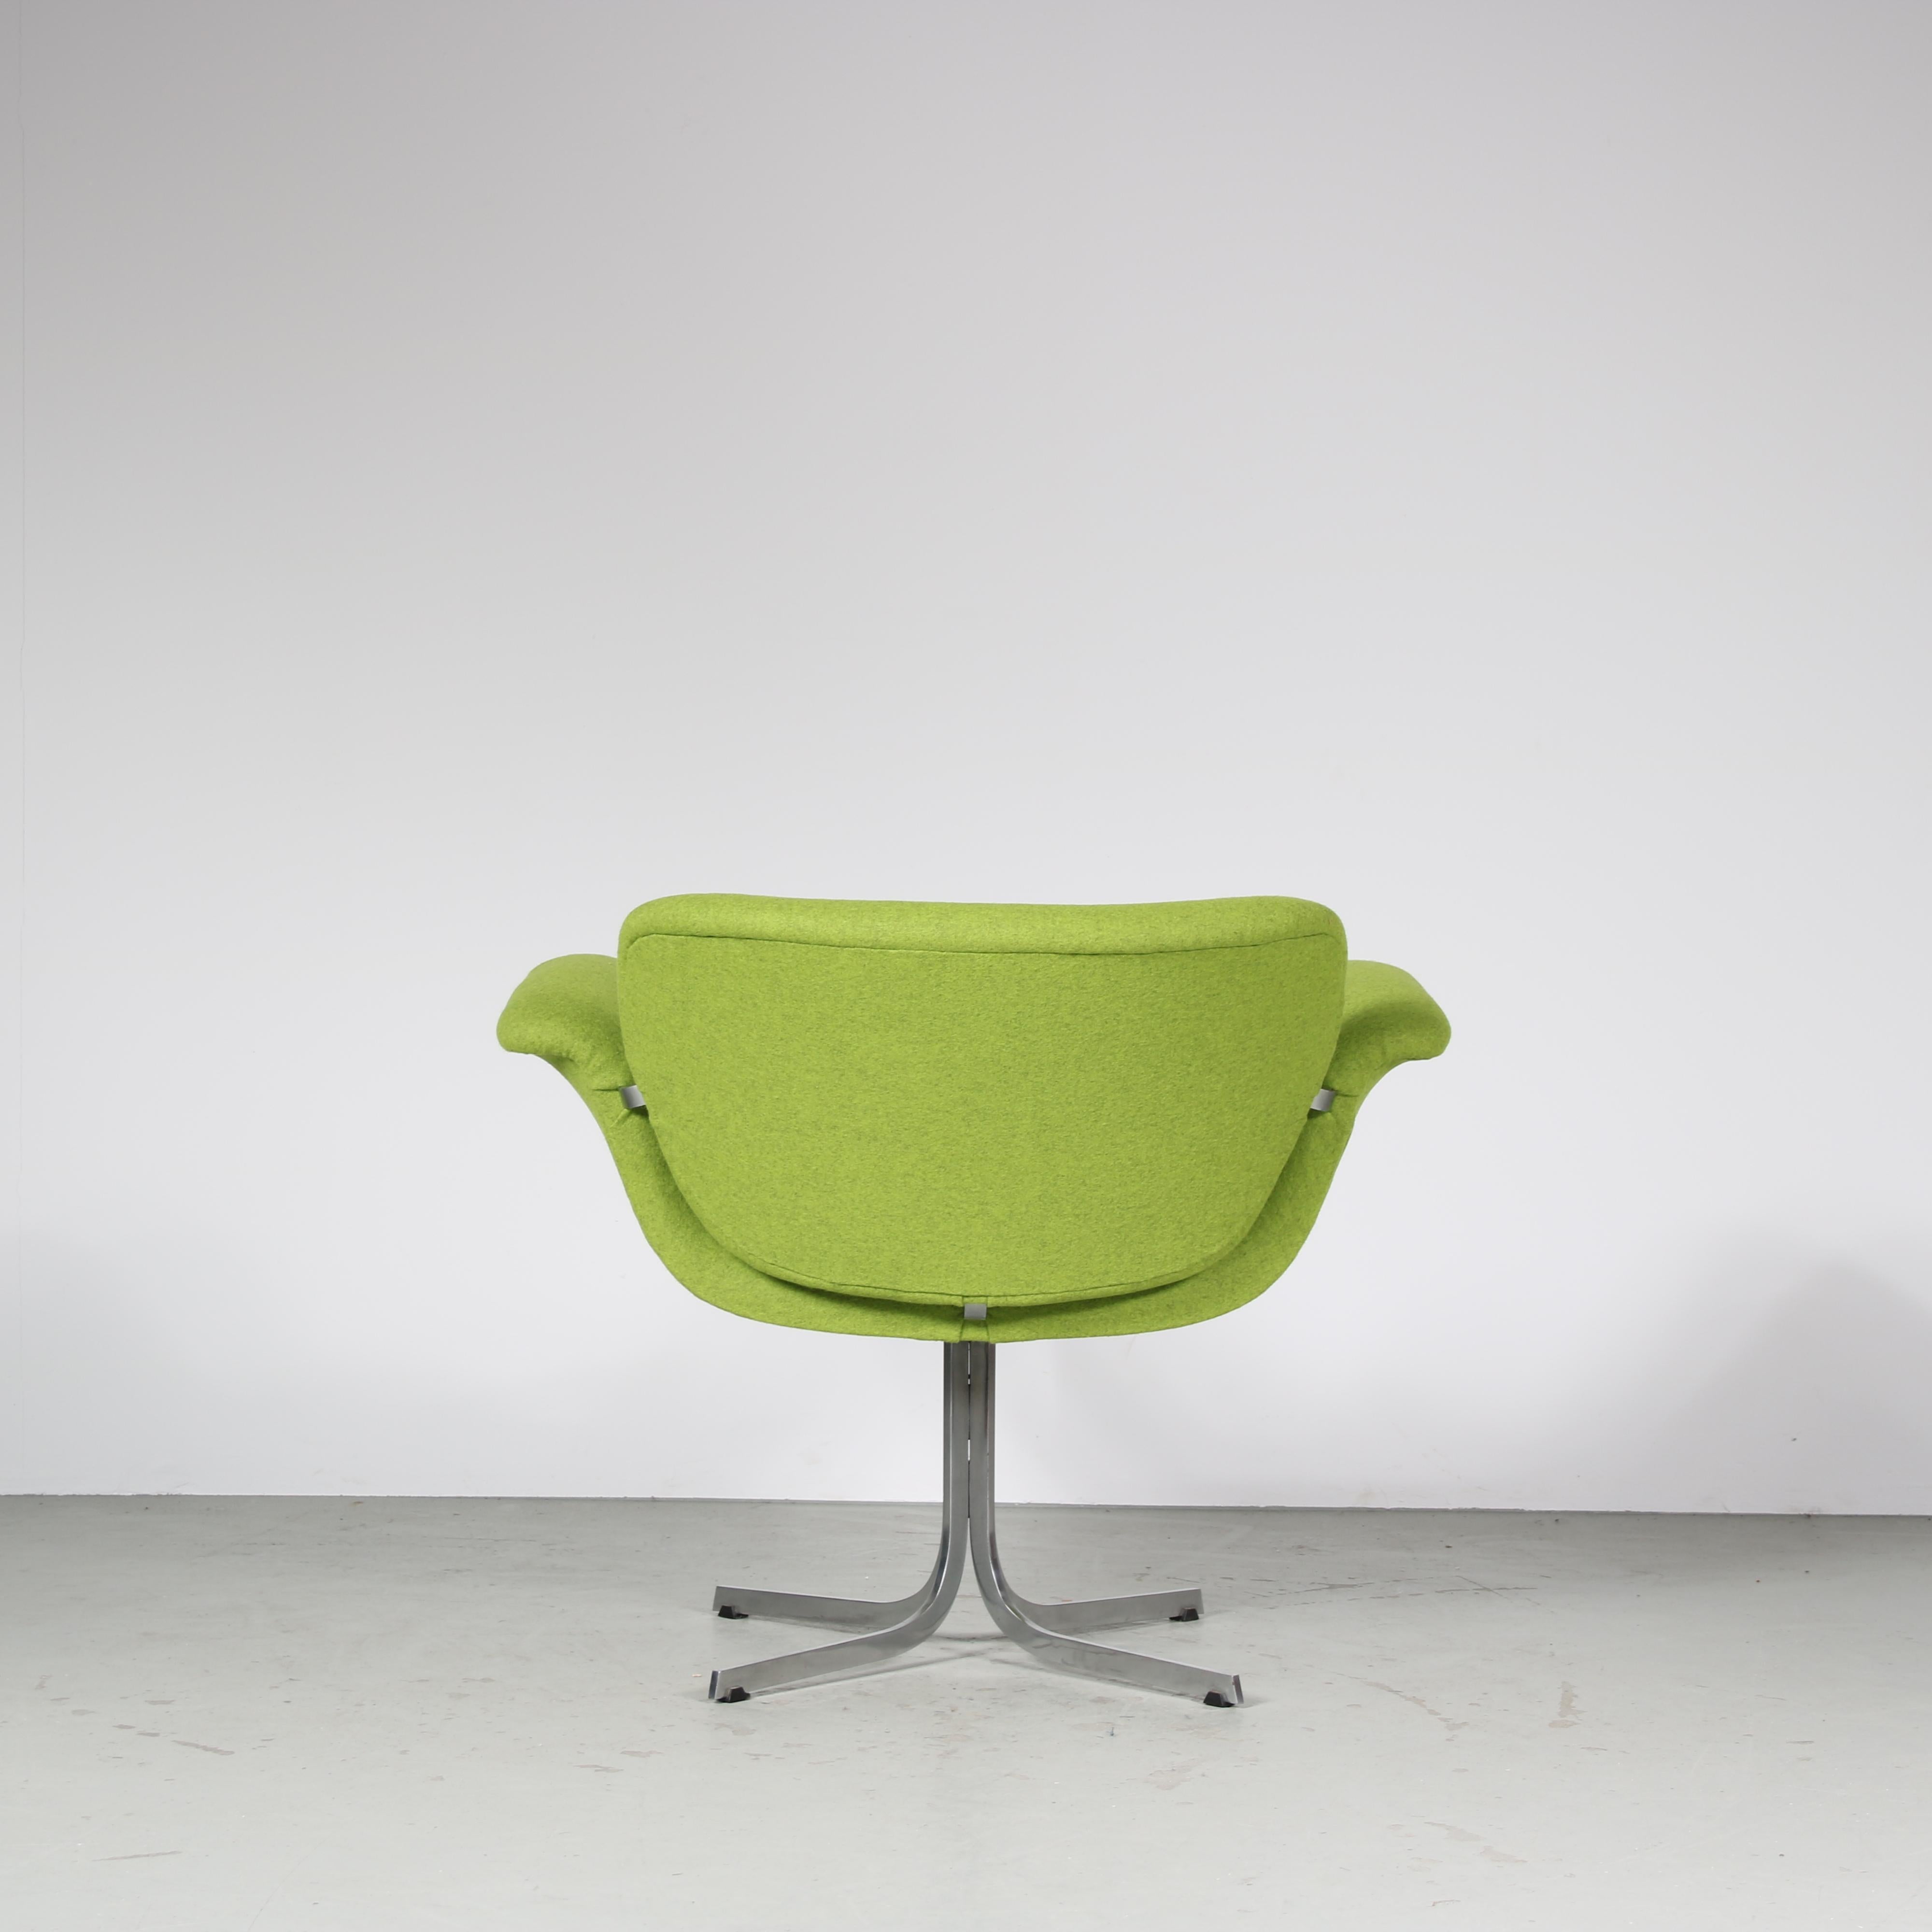 Fabric Pierre Paulin “Big Tulip” Chair for Artifort, Netherlands 1960 For Sale